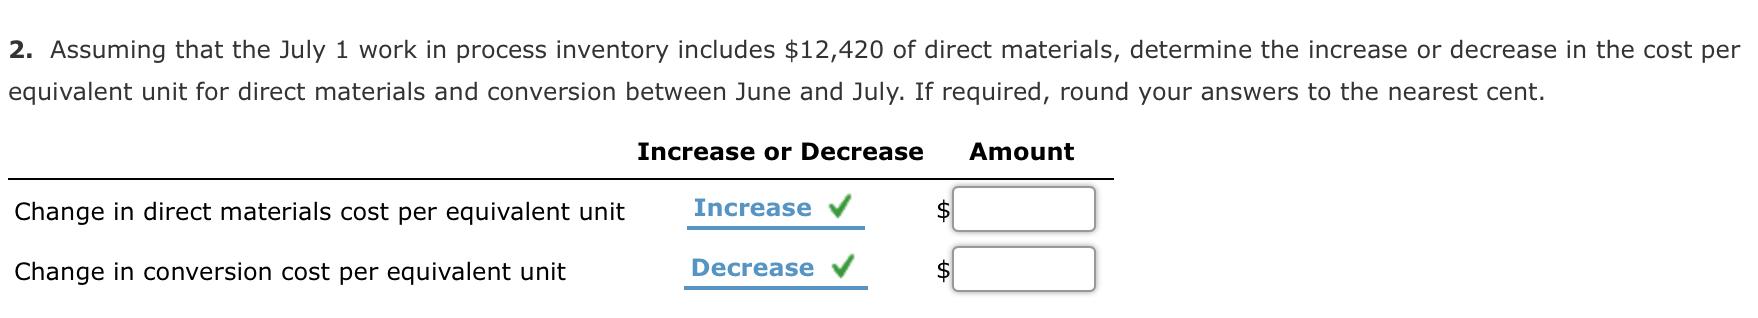 2. Assuming that the July 1 work in process inventory includes $12,420 of direct materials, determine the increase or decreas